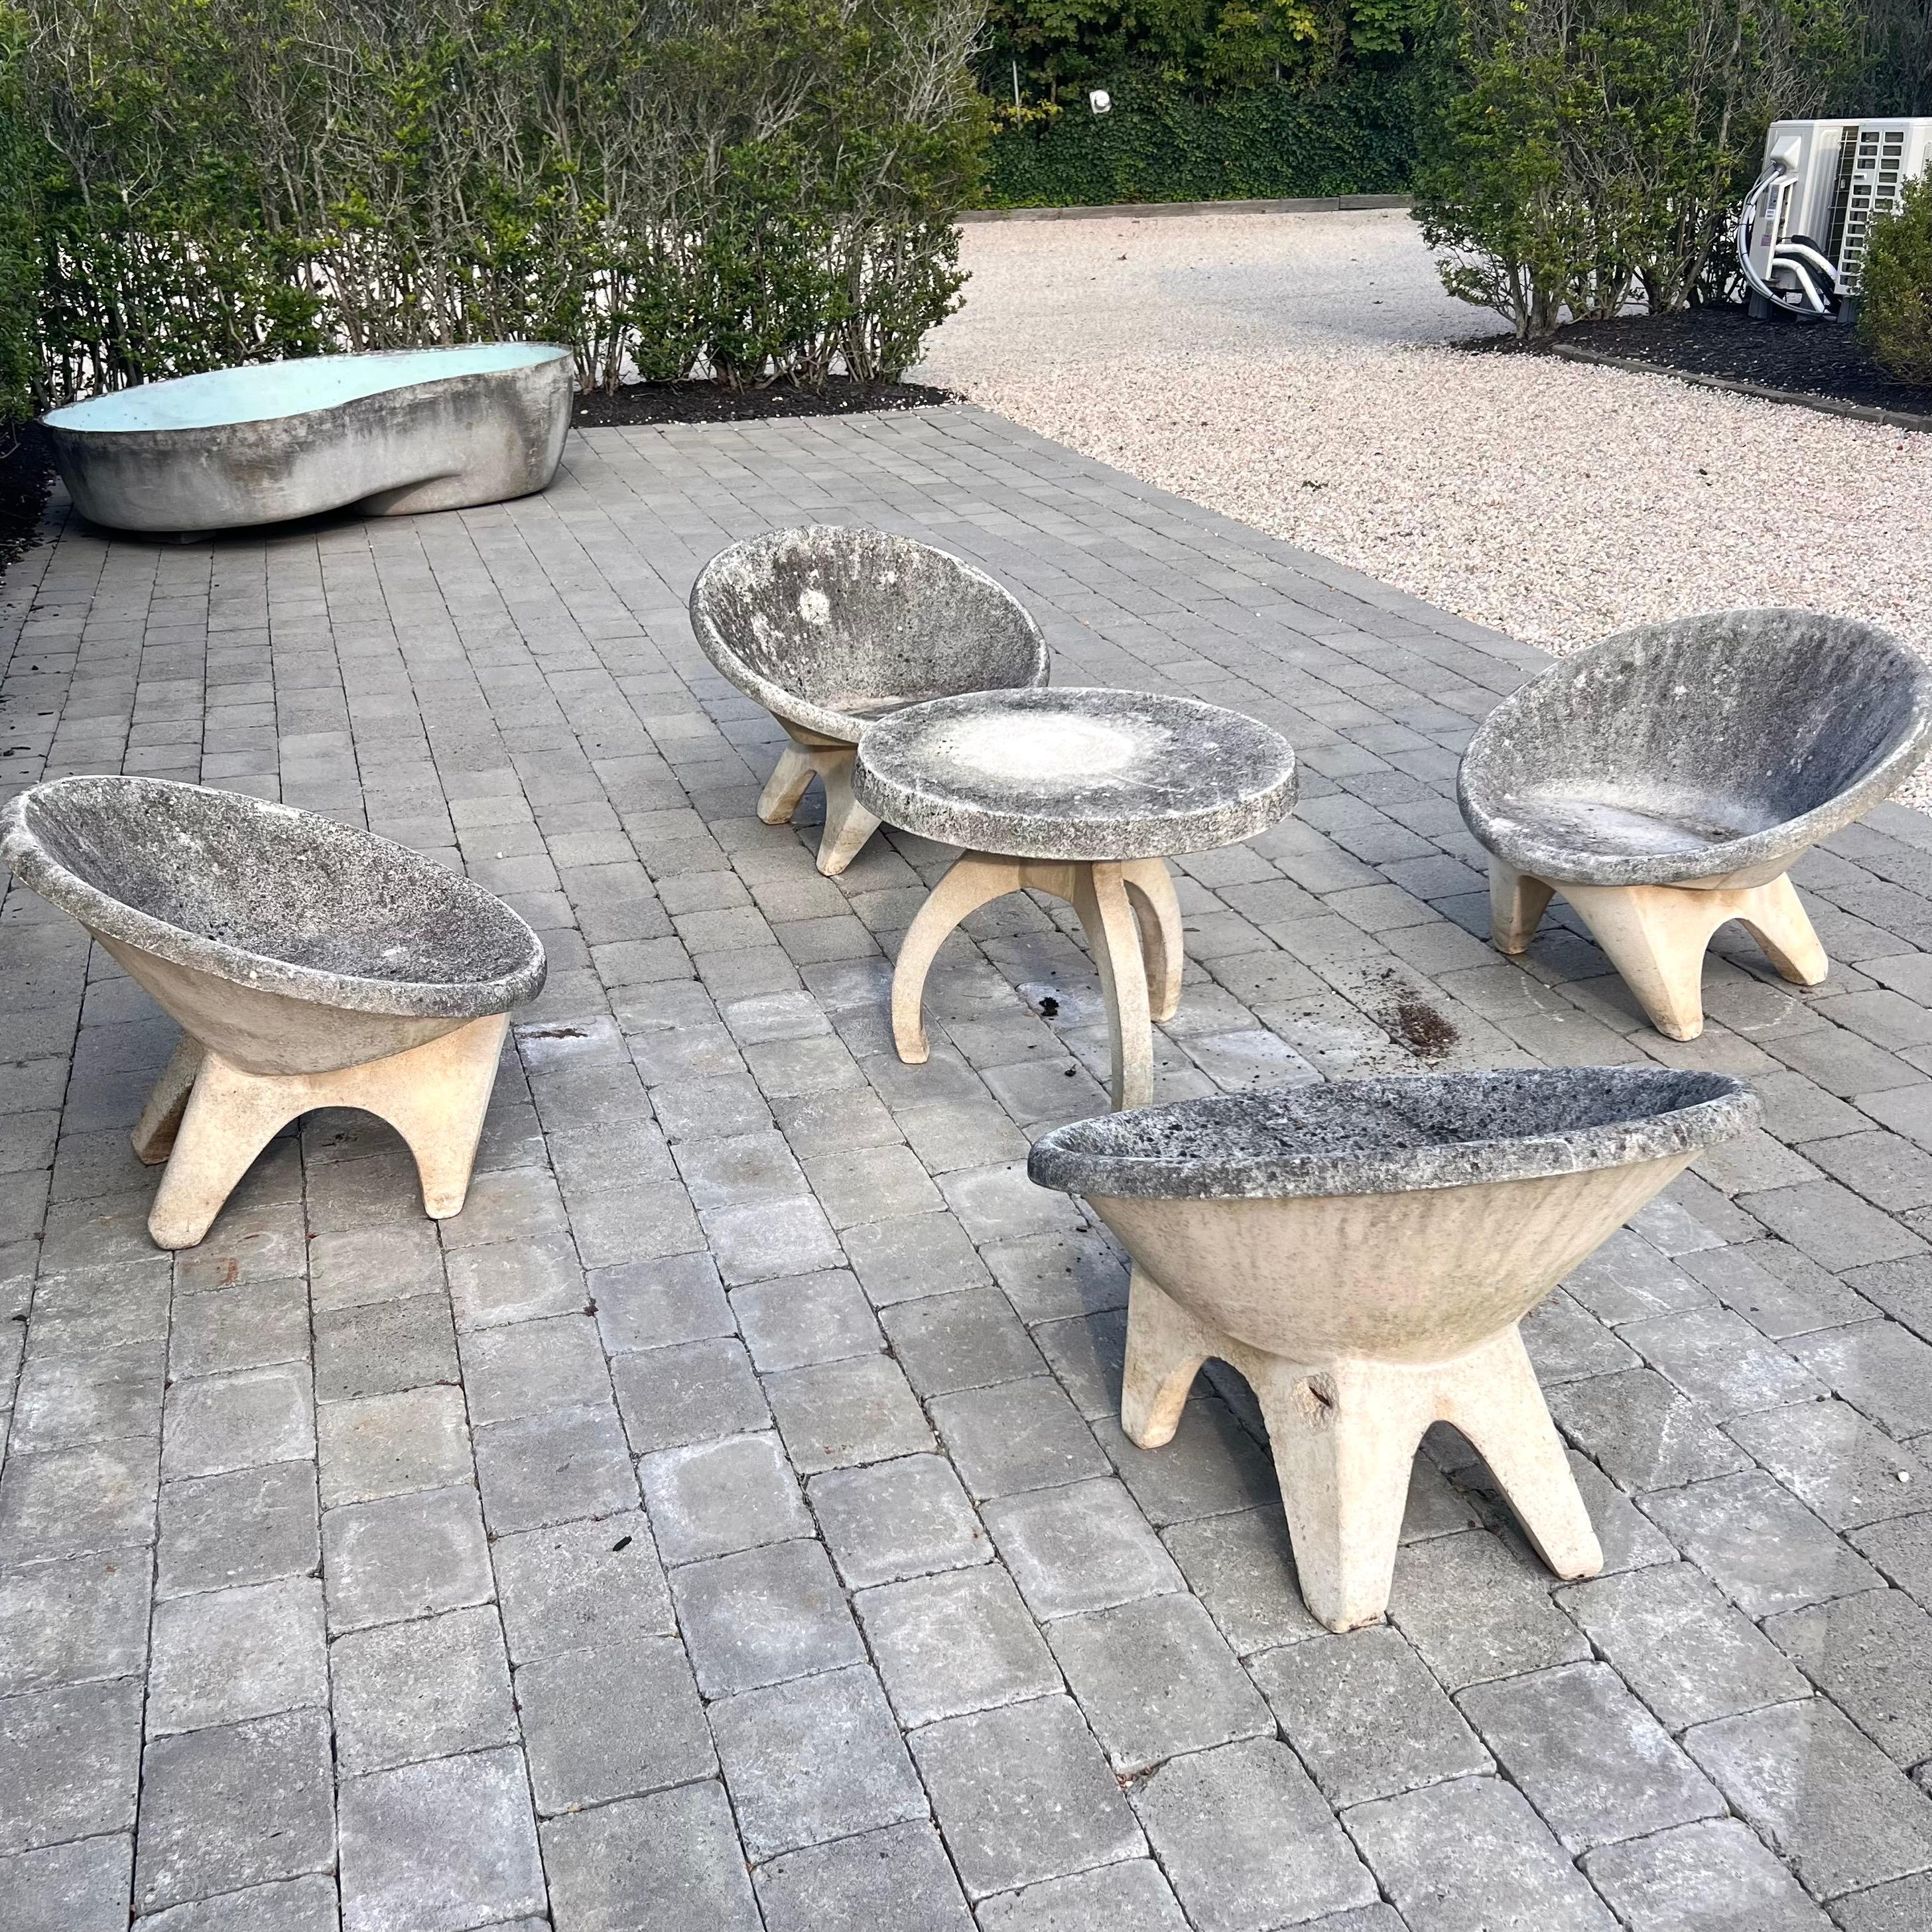 Stunning outdoor set consisting of four chairs with a matching table, all made of solid concrete. Round saucer seat with angular legs. Incredible modern design with very fantastic patina. Factory drilled hole in each chair for water to drain. Great